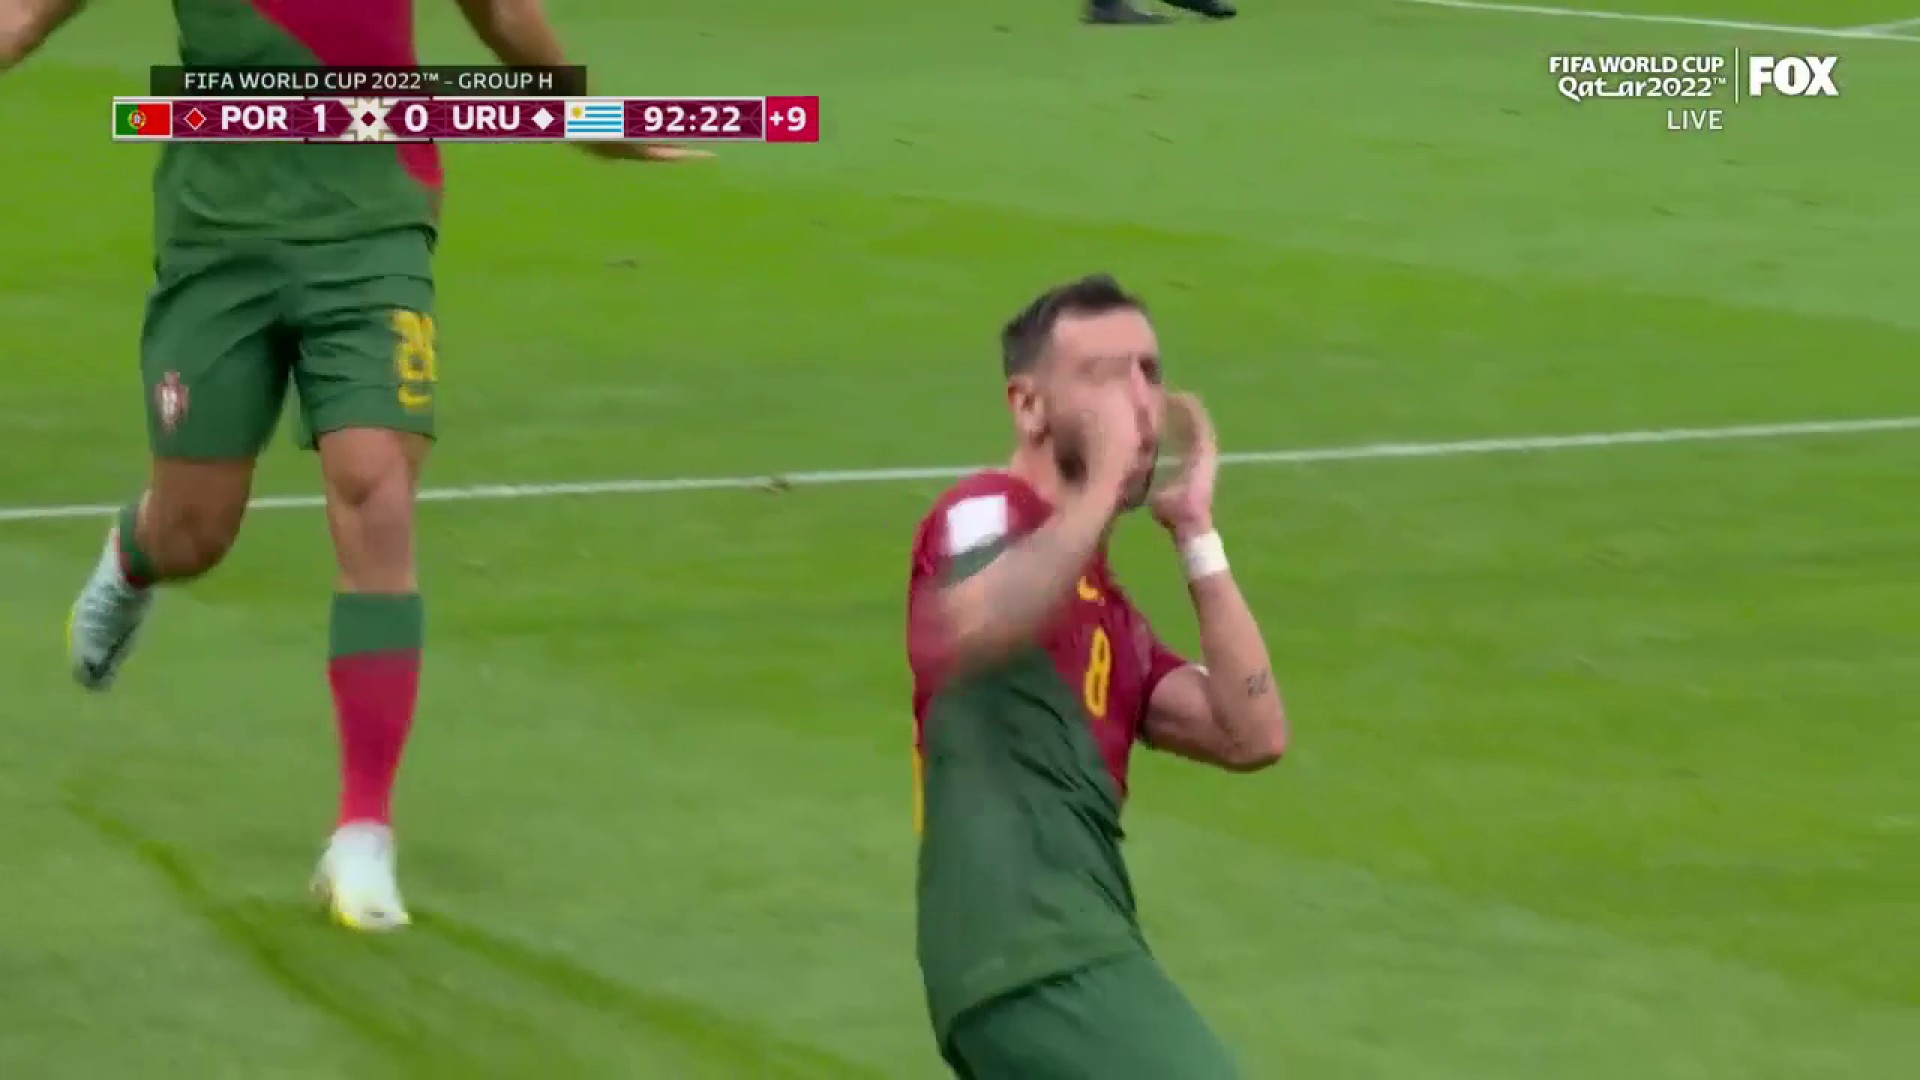 Too easy for Bruno Fernandes 🔥

He scores his second of the match and extends Portugal's lead 🇵🇹”